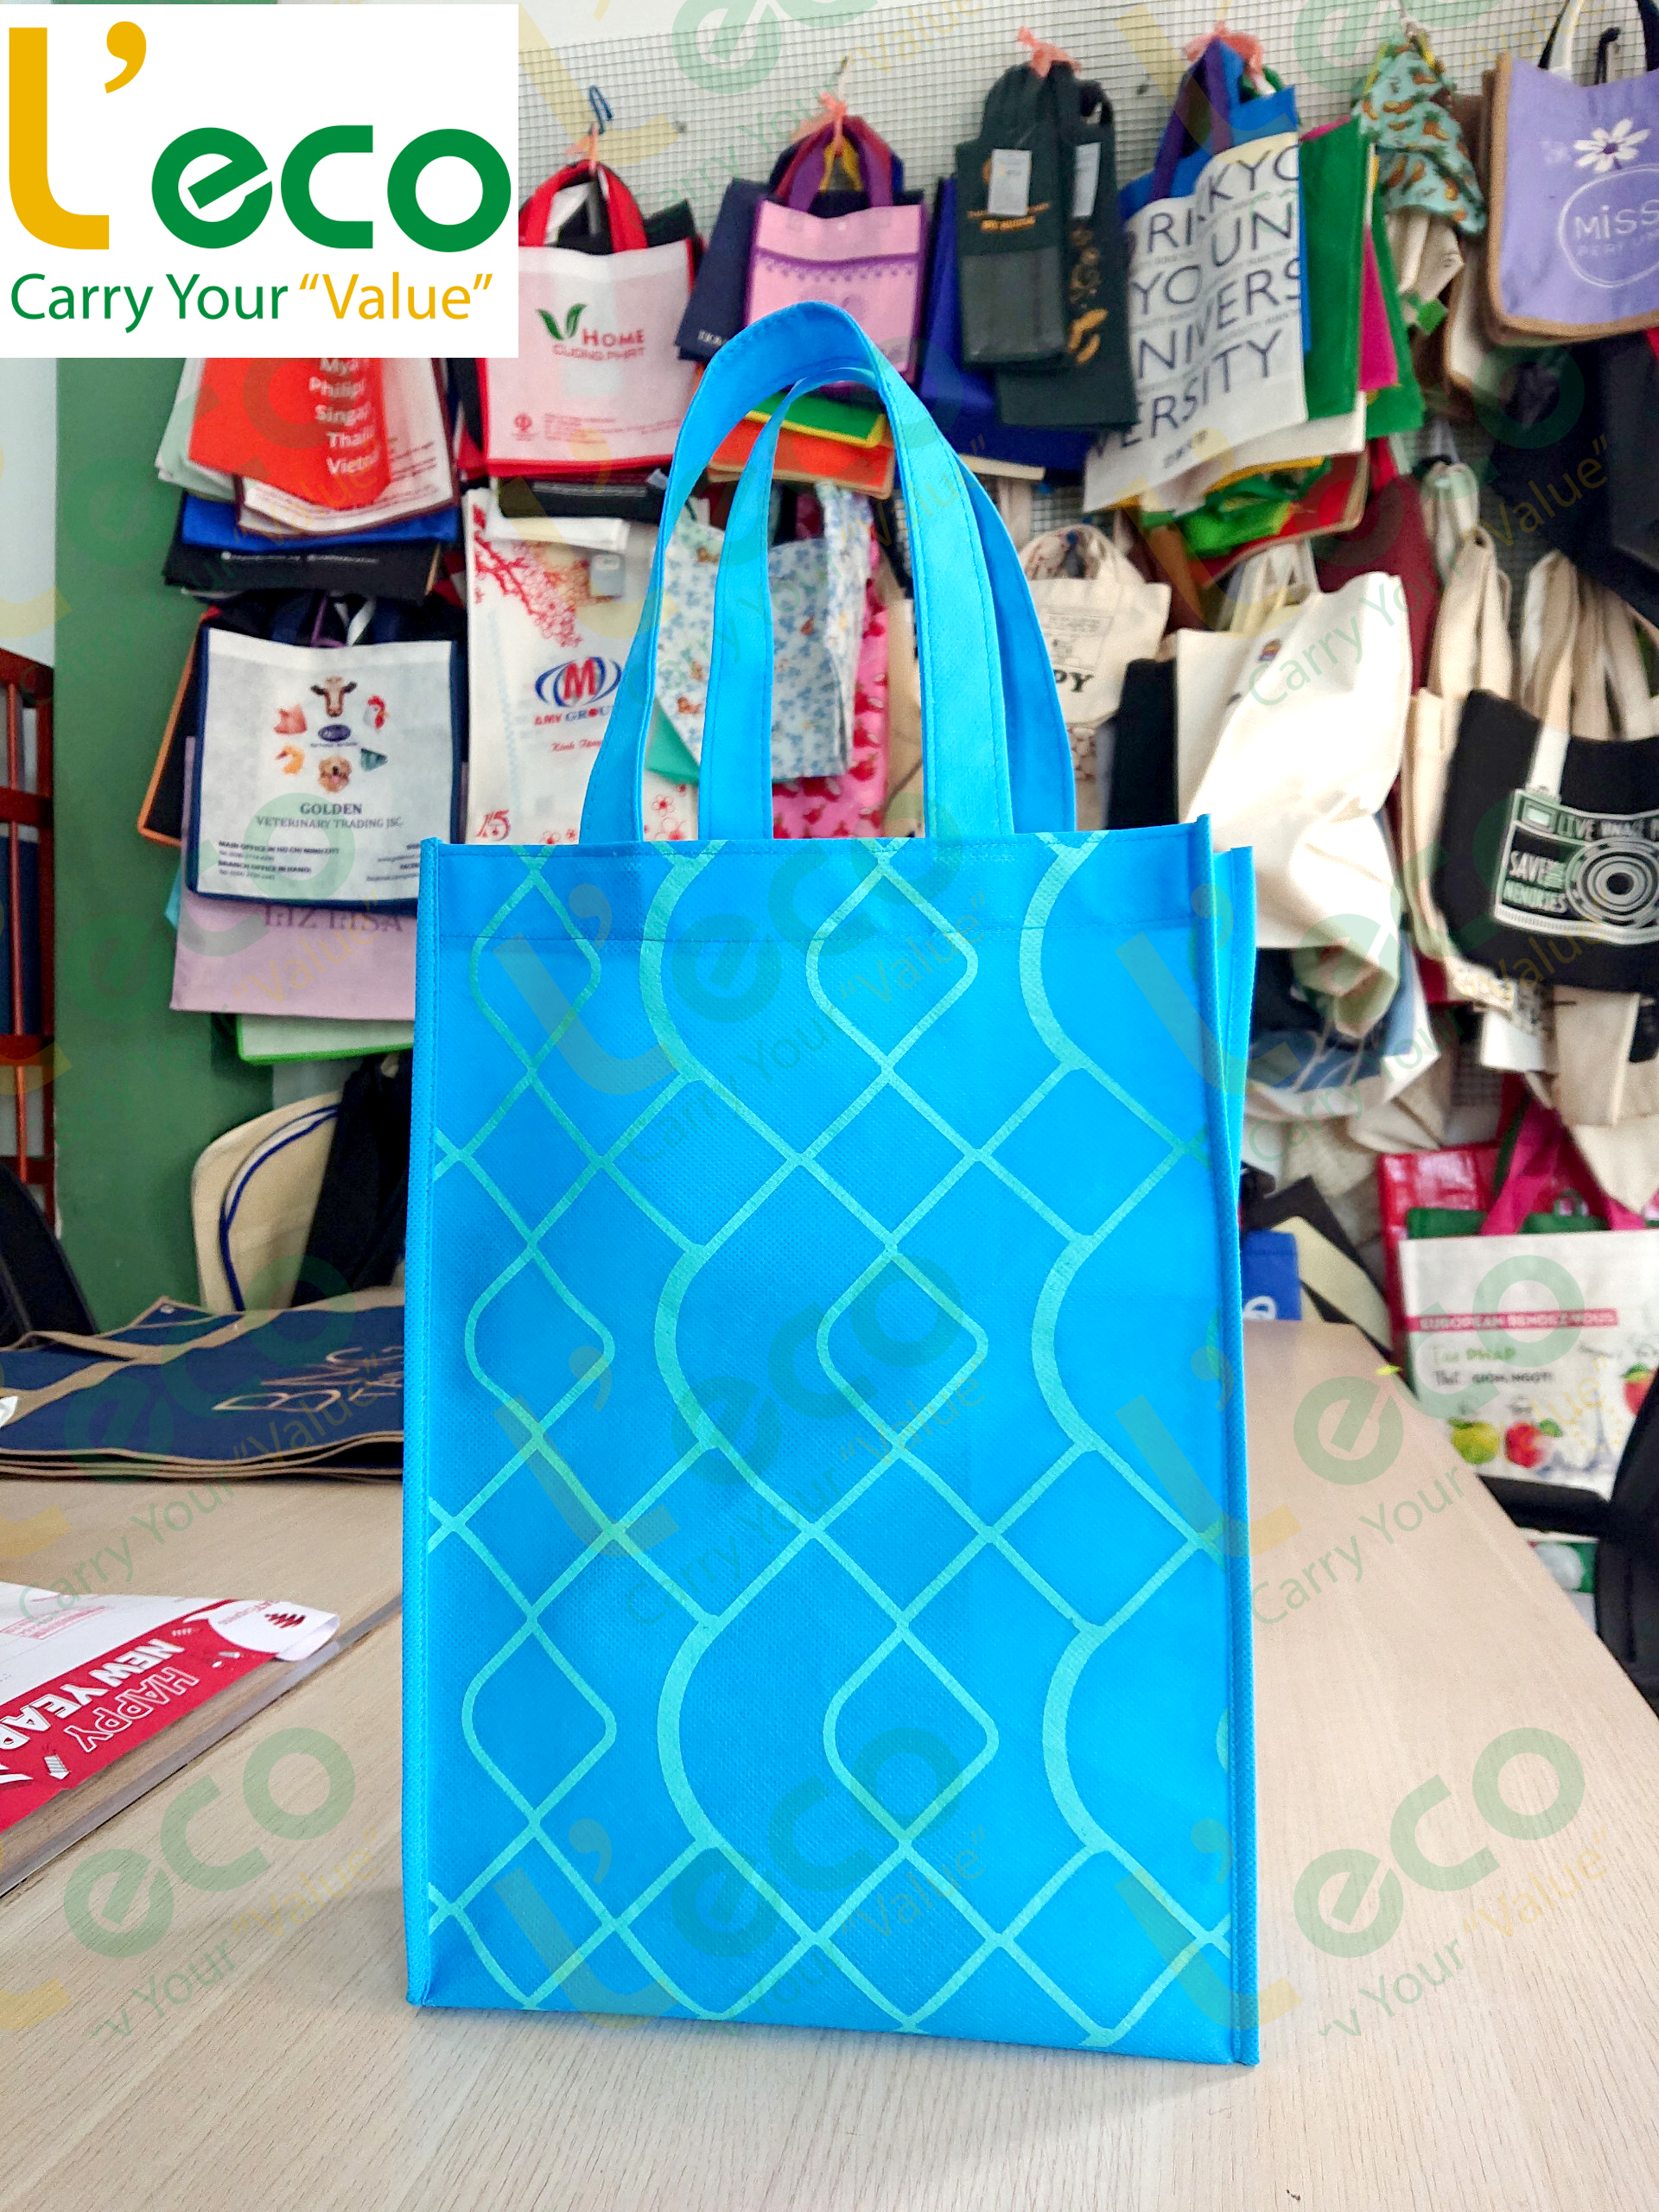 Using non-woven bags connects businesses with customers